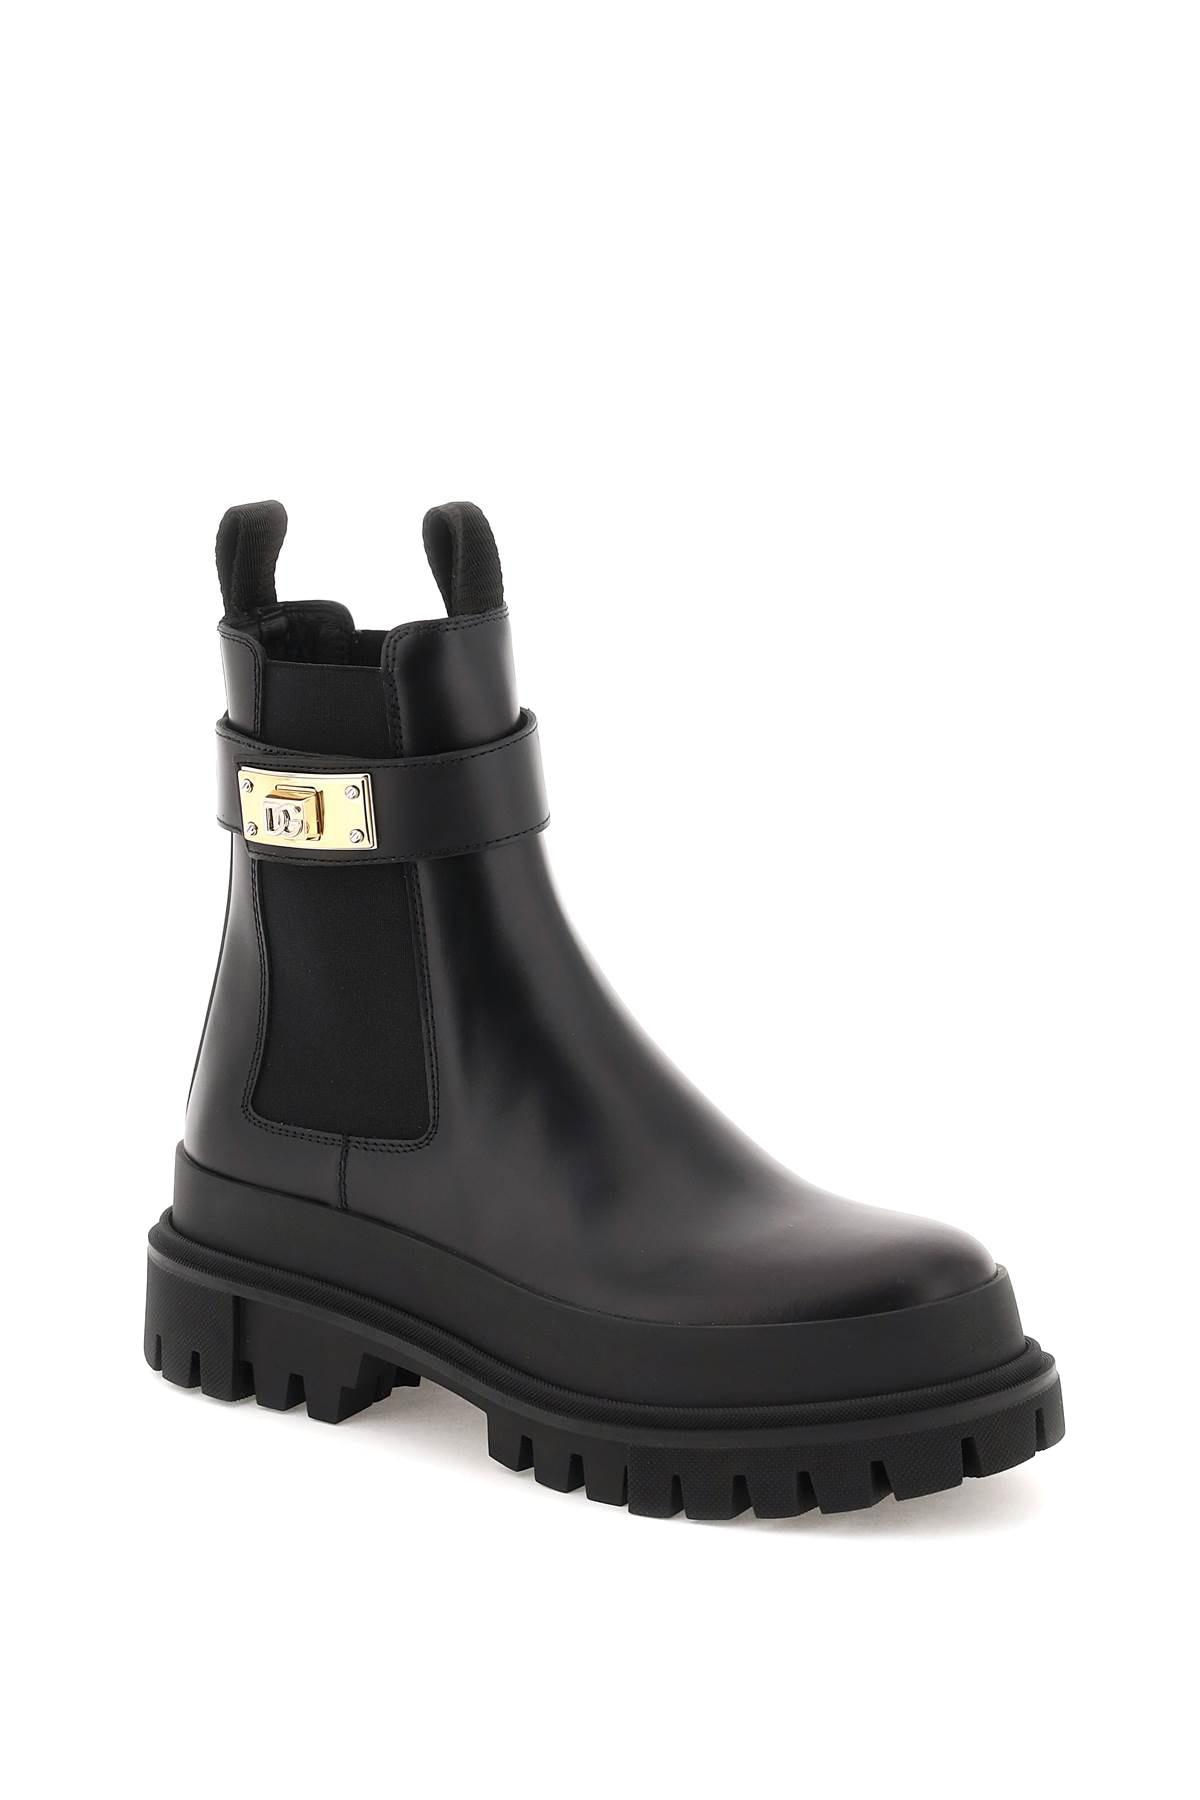 Dolce & Gabbana Leather Ankle Boots With Logo Closure in Black | Lyst